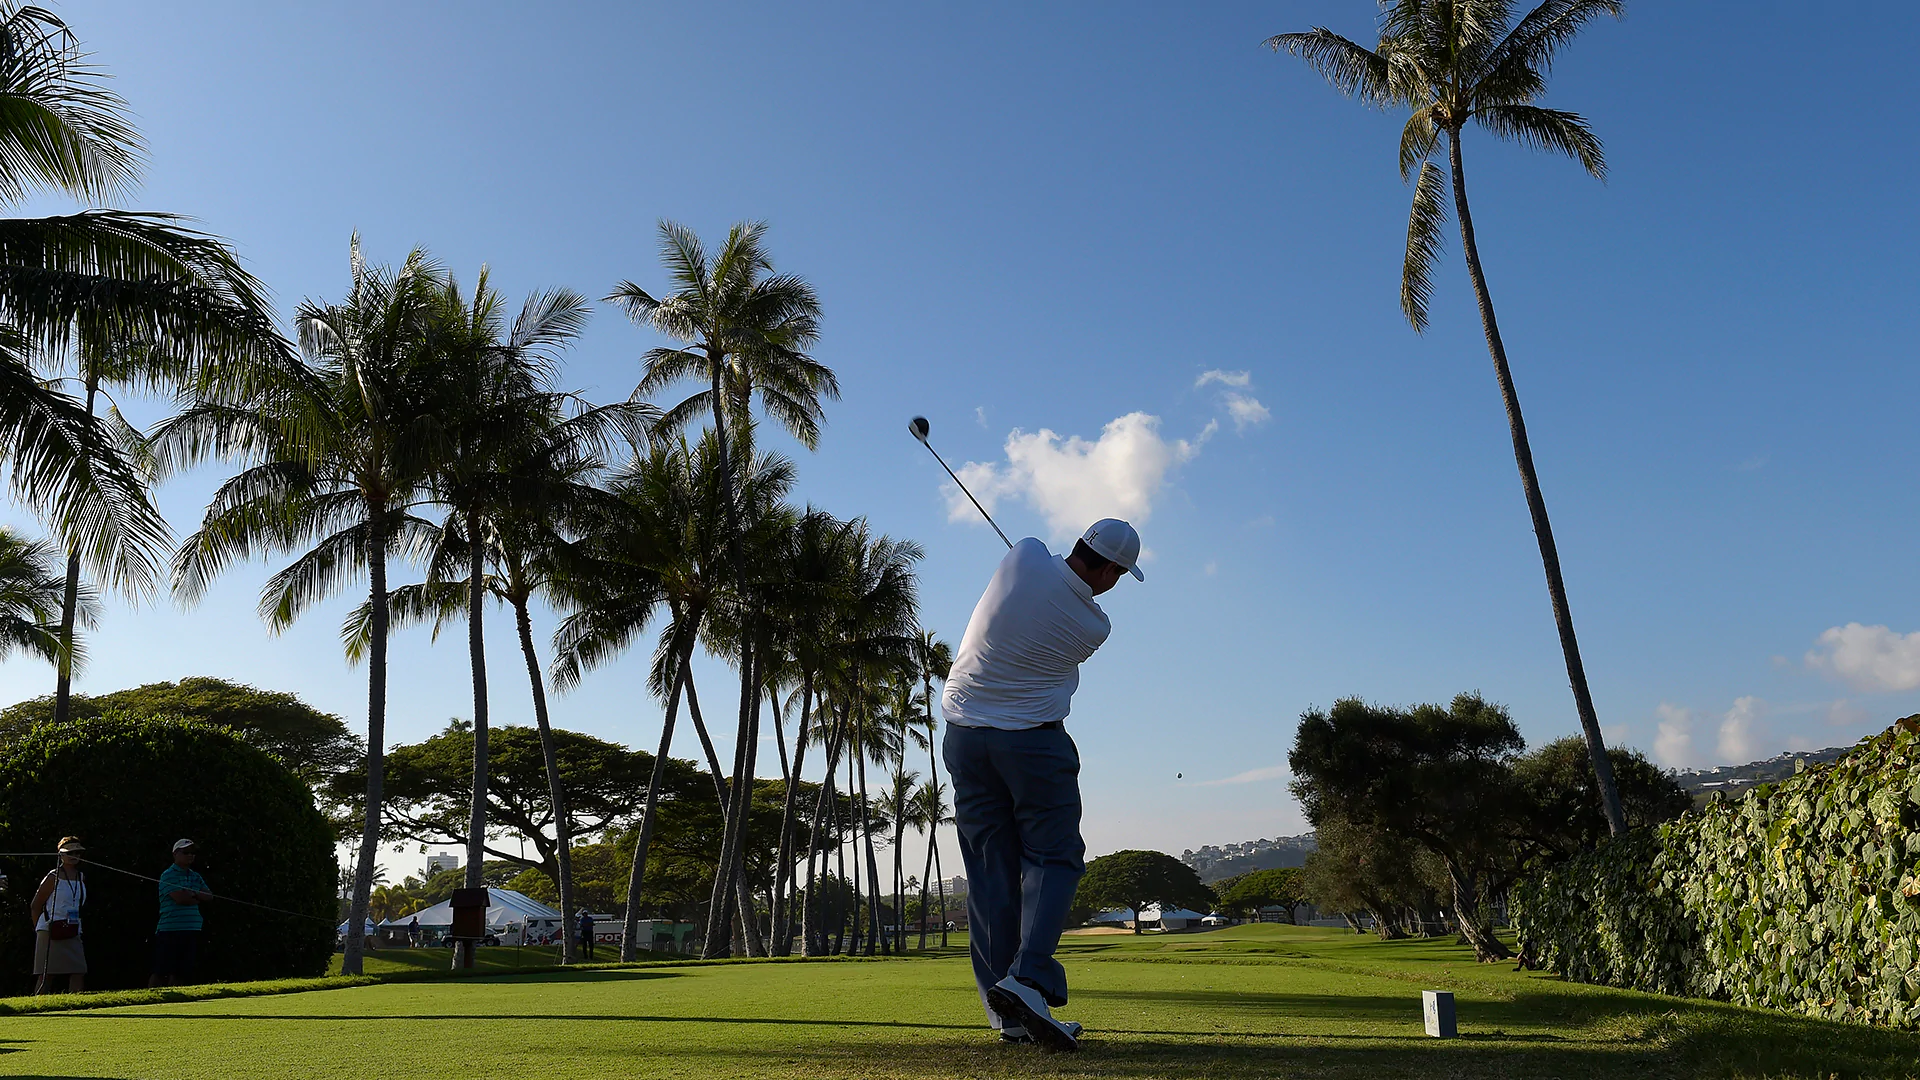 ‘Great idea’: Players OK with Tour’s late addition of internal out of bounds at Sony Open